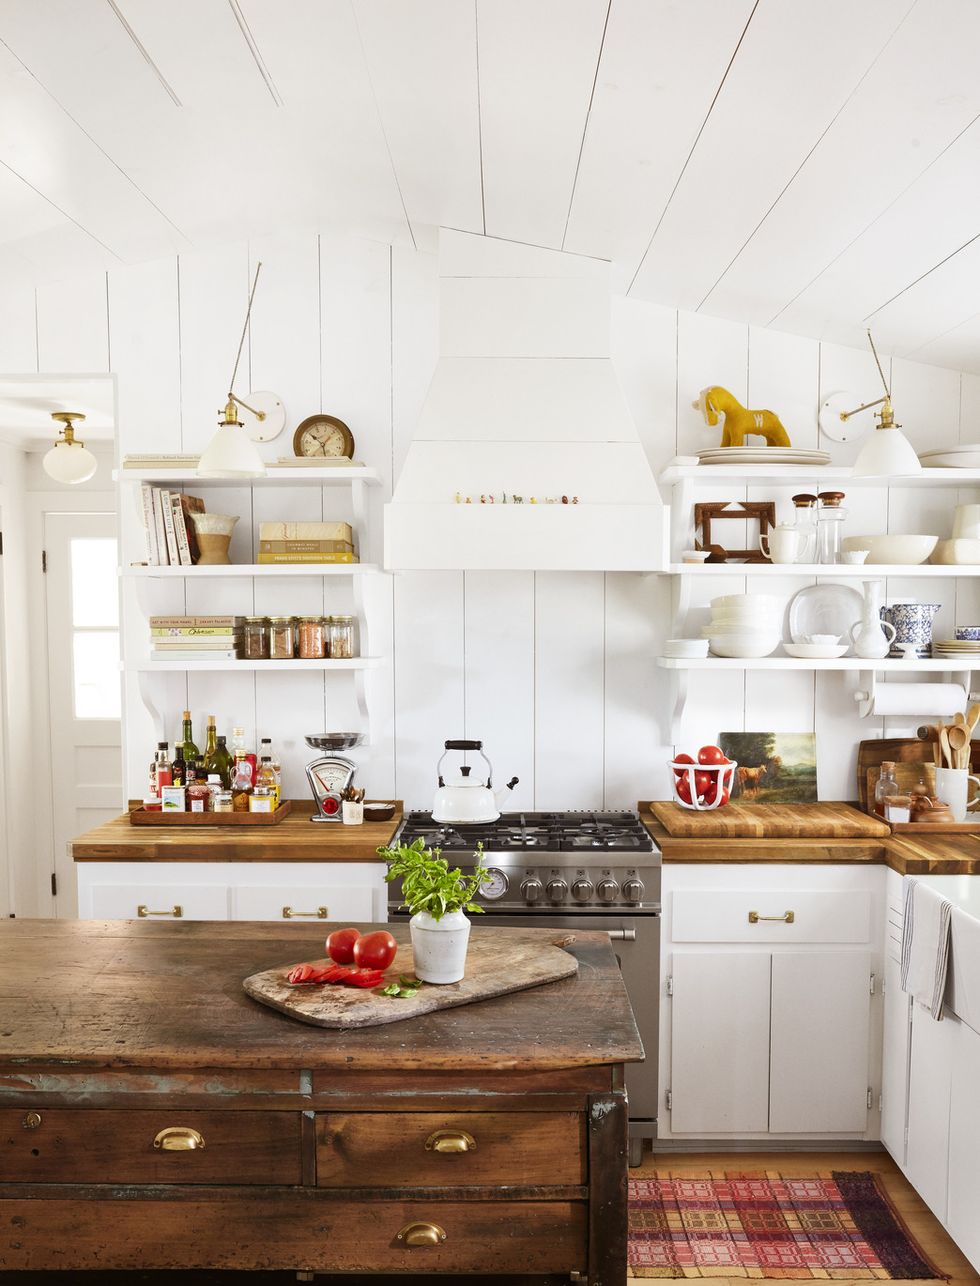 9 Excellent Kitchen Decor Ideas To Freshen Up Your Home